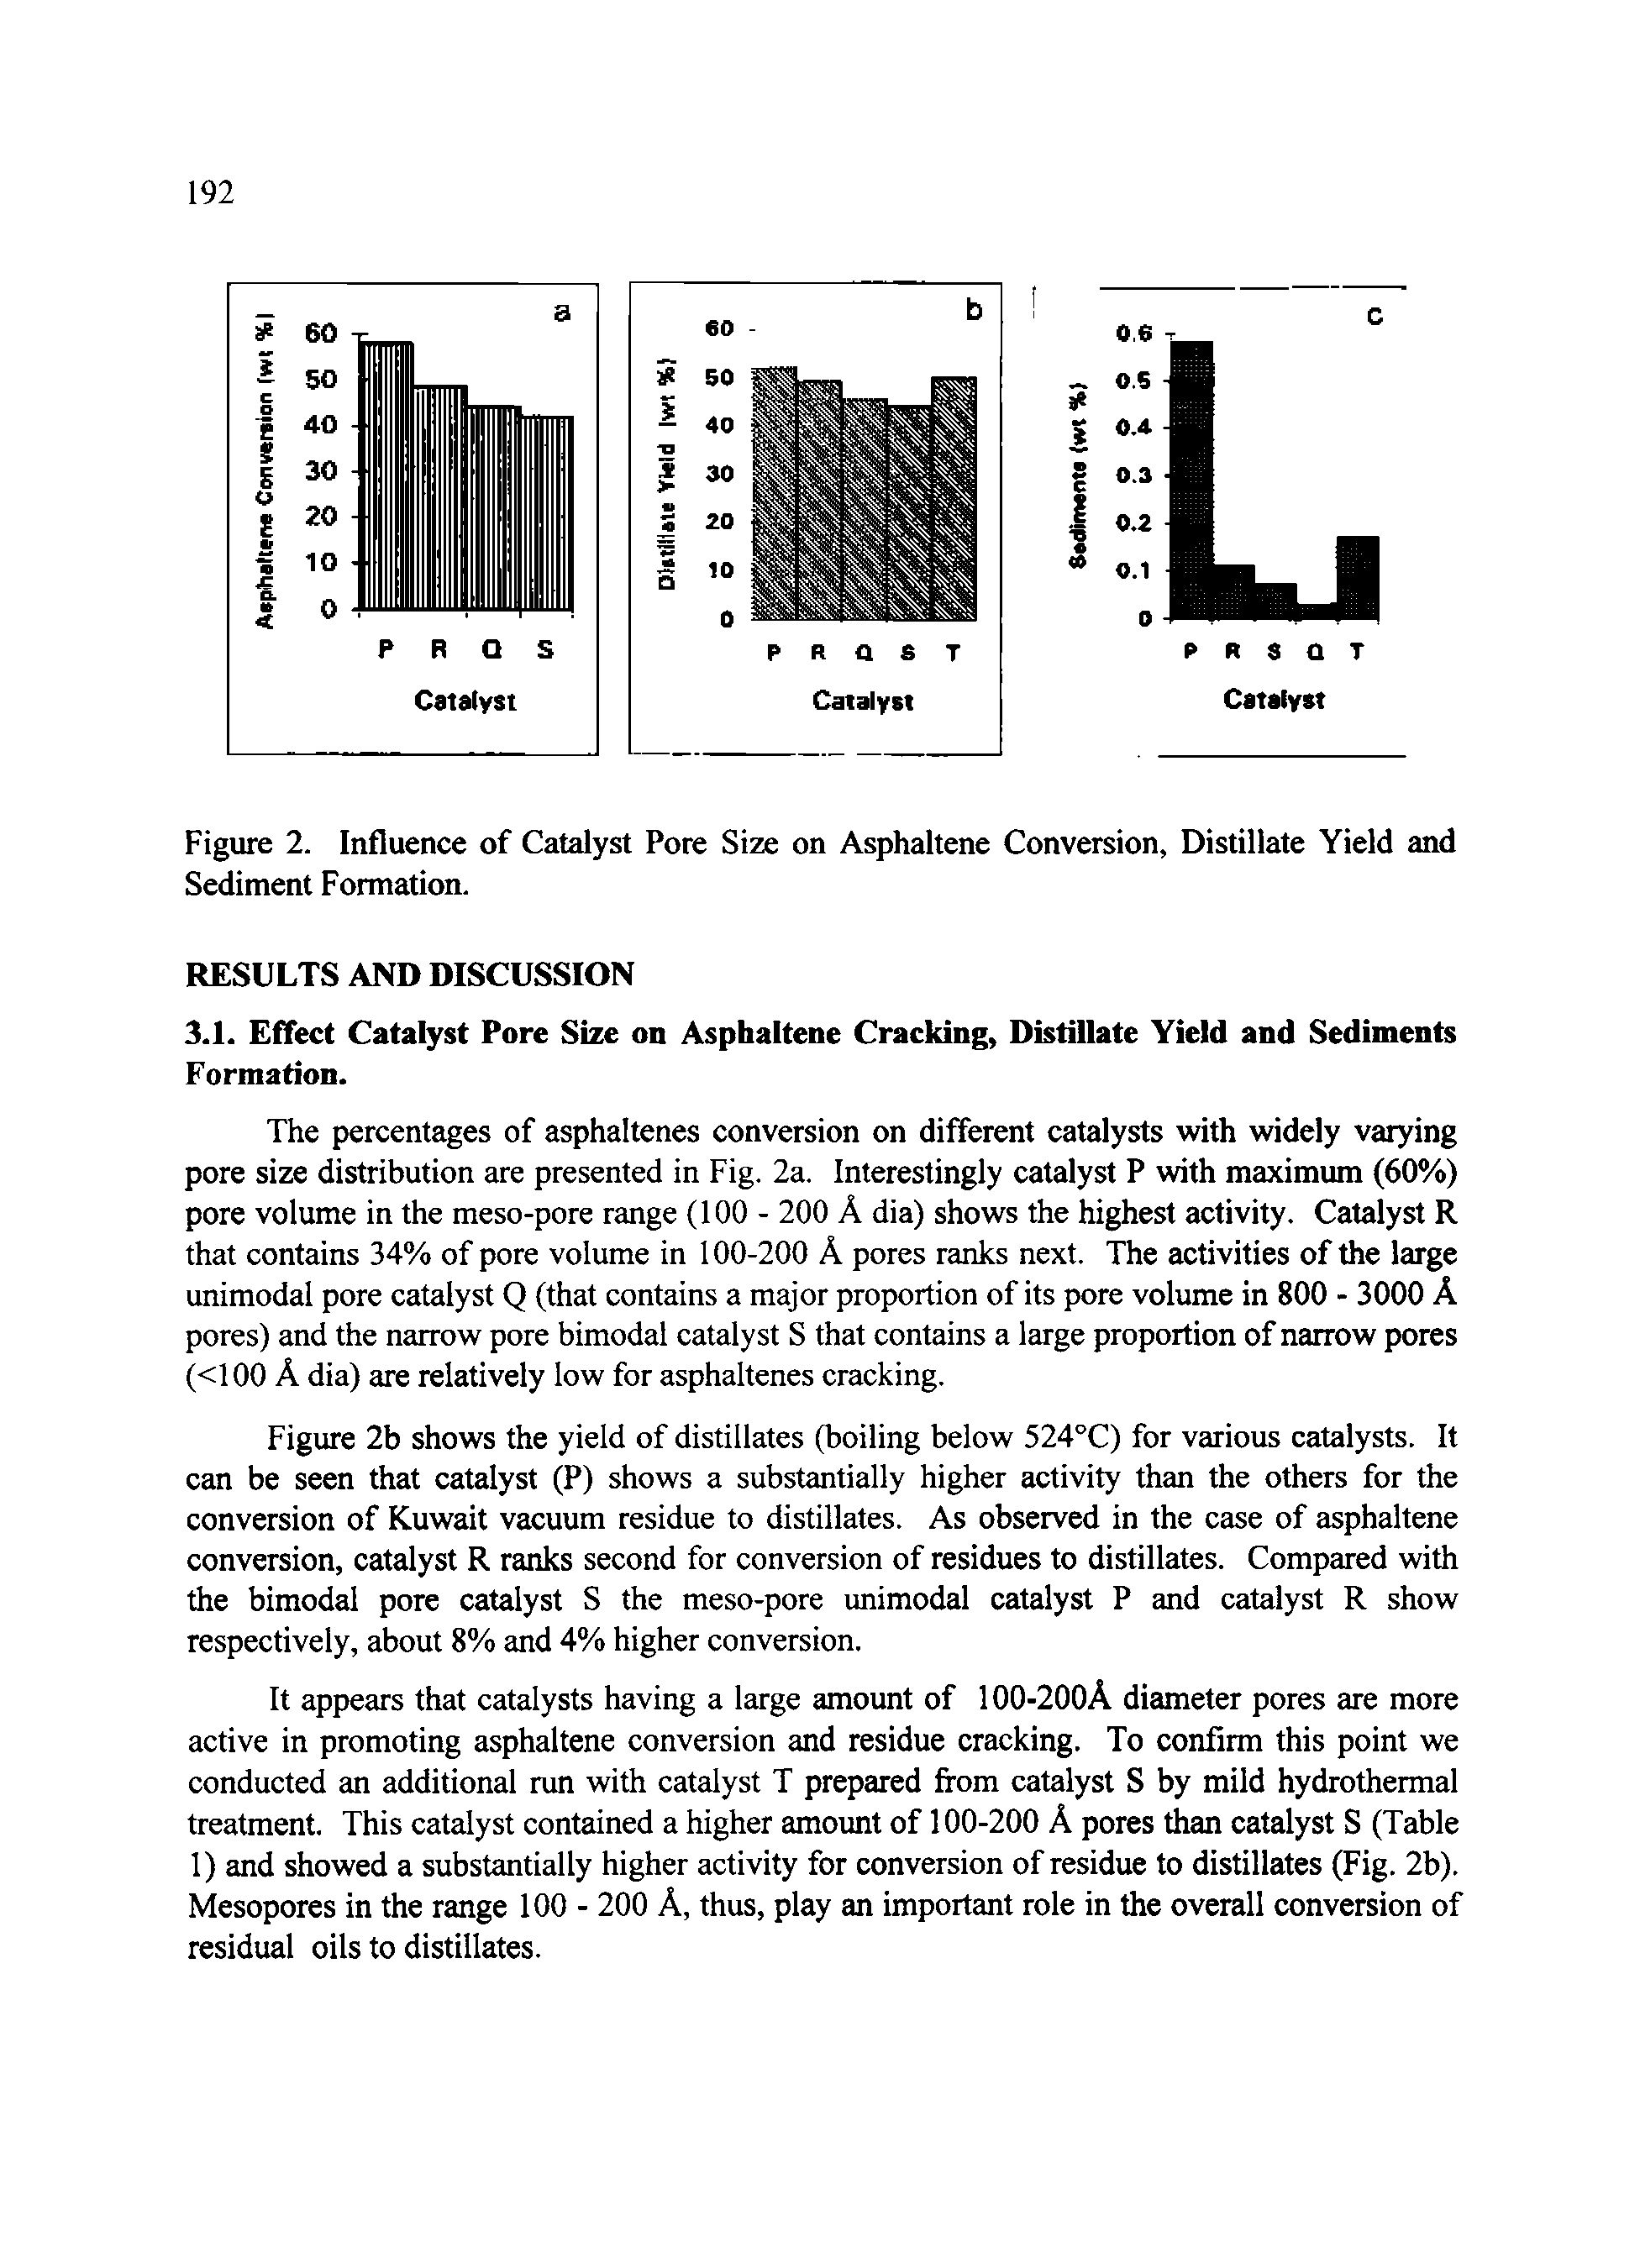 Figure 2. Influence of Catalyst Pore Size on Asphaltene Conversion, Distillate Yield and Sediment Formation.